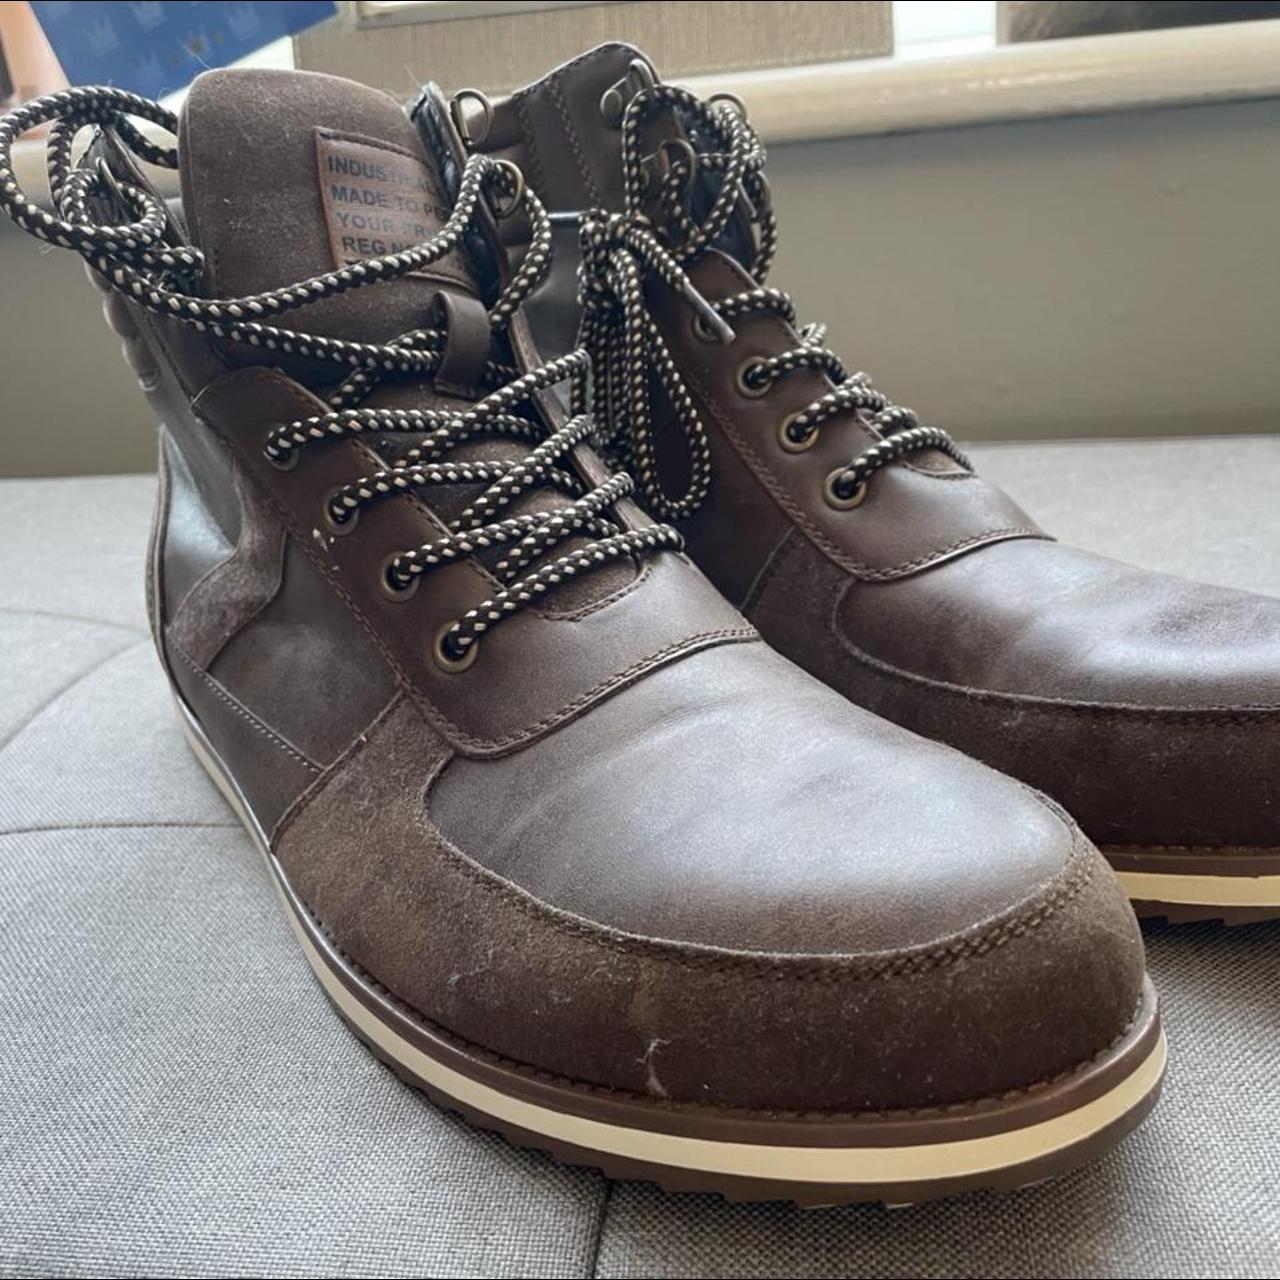 Brown leather mens boots size 10. - Depop